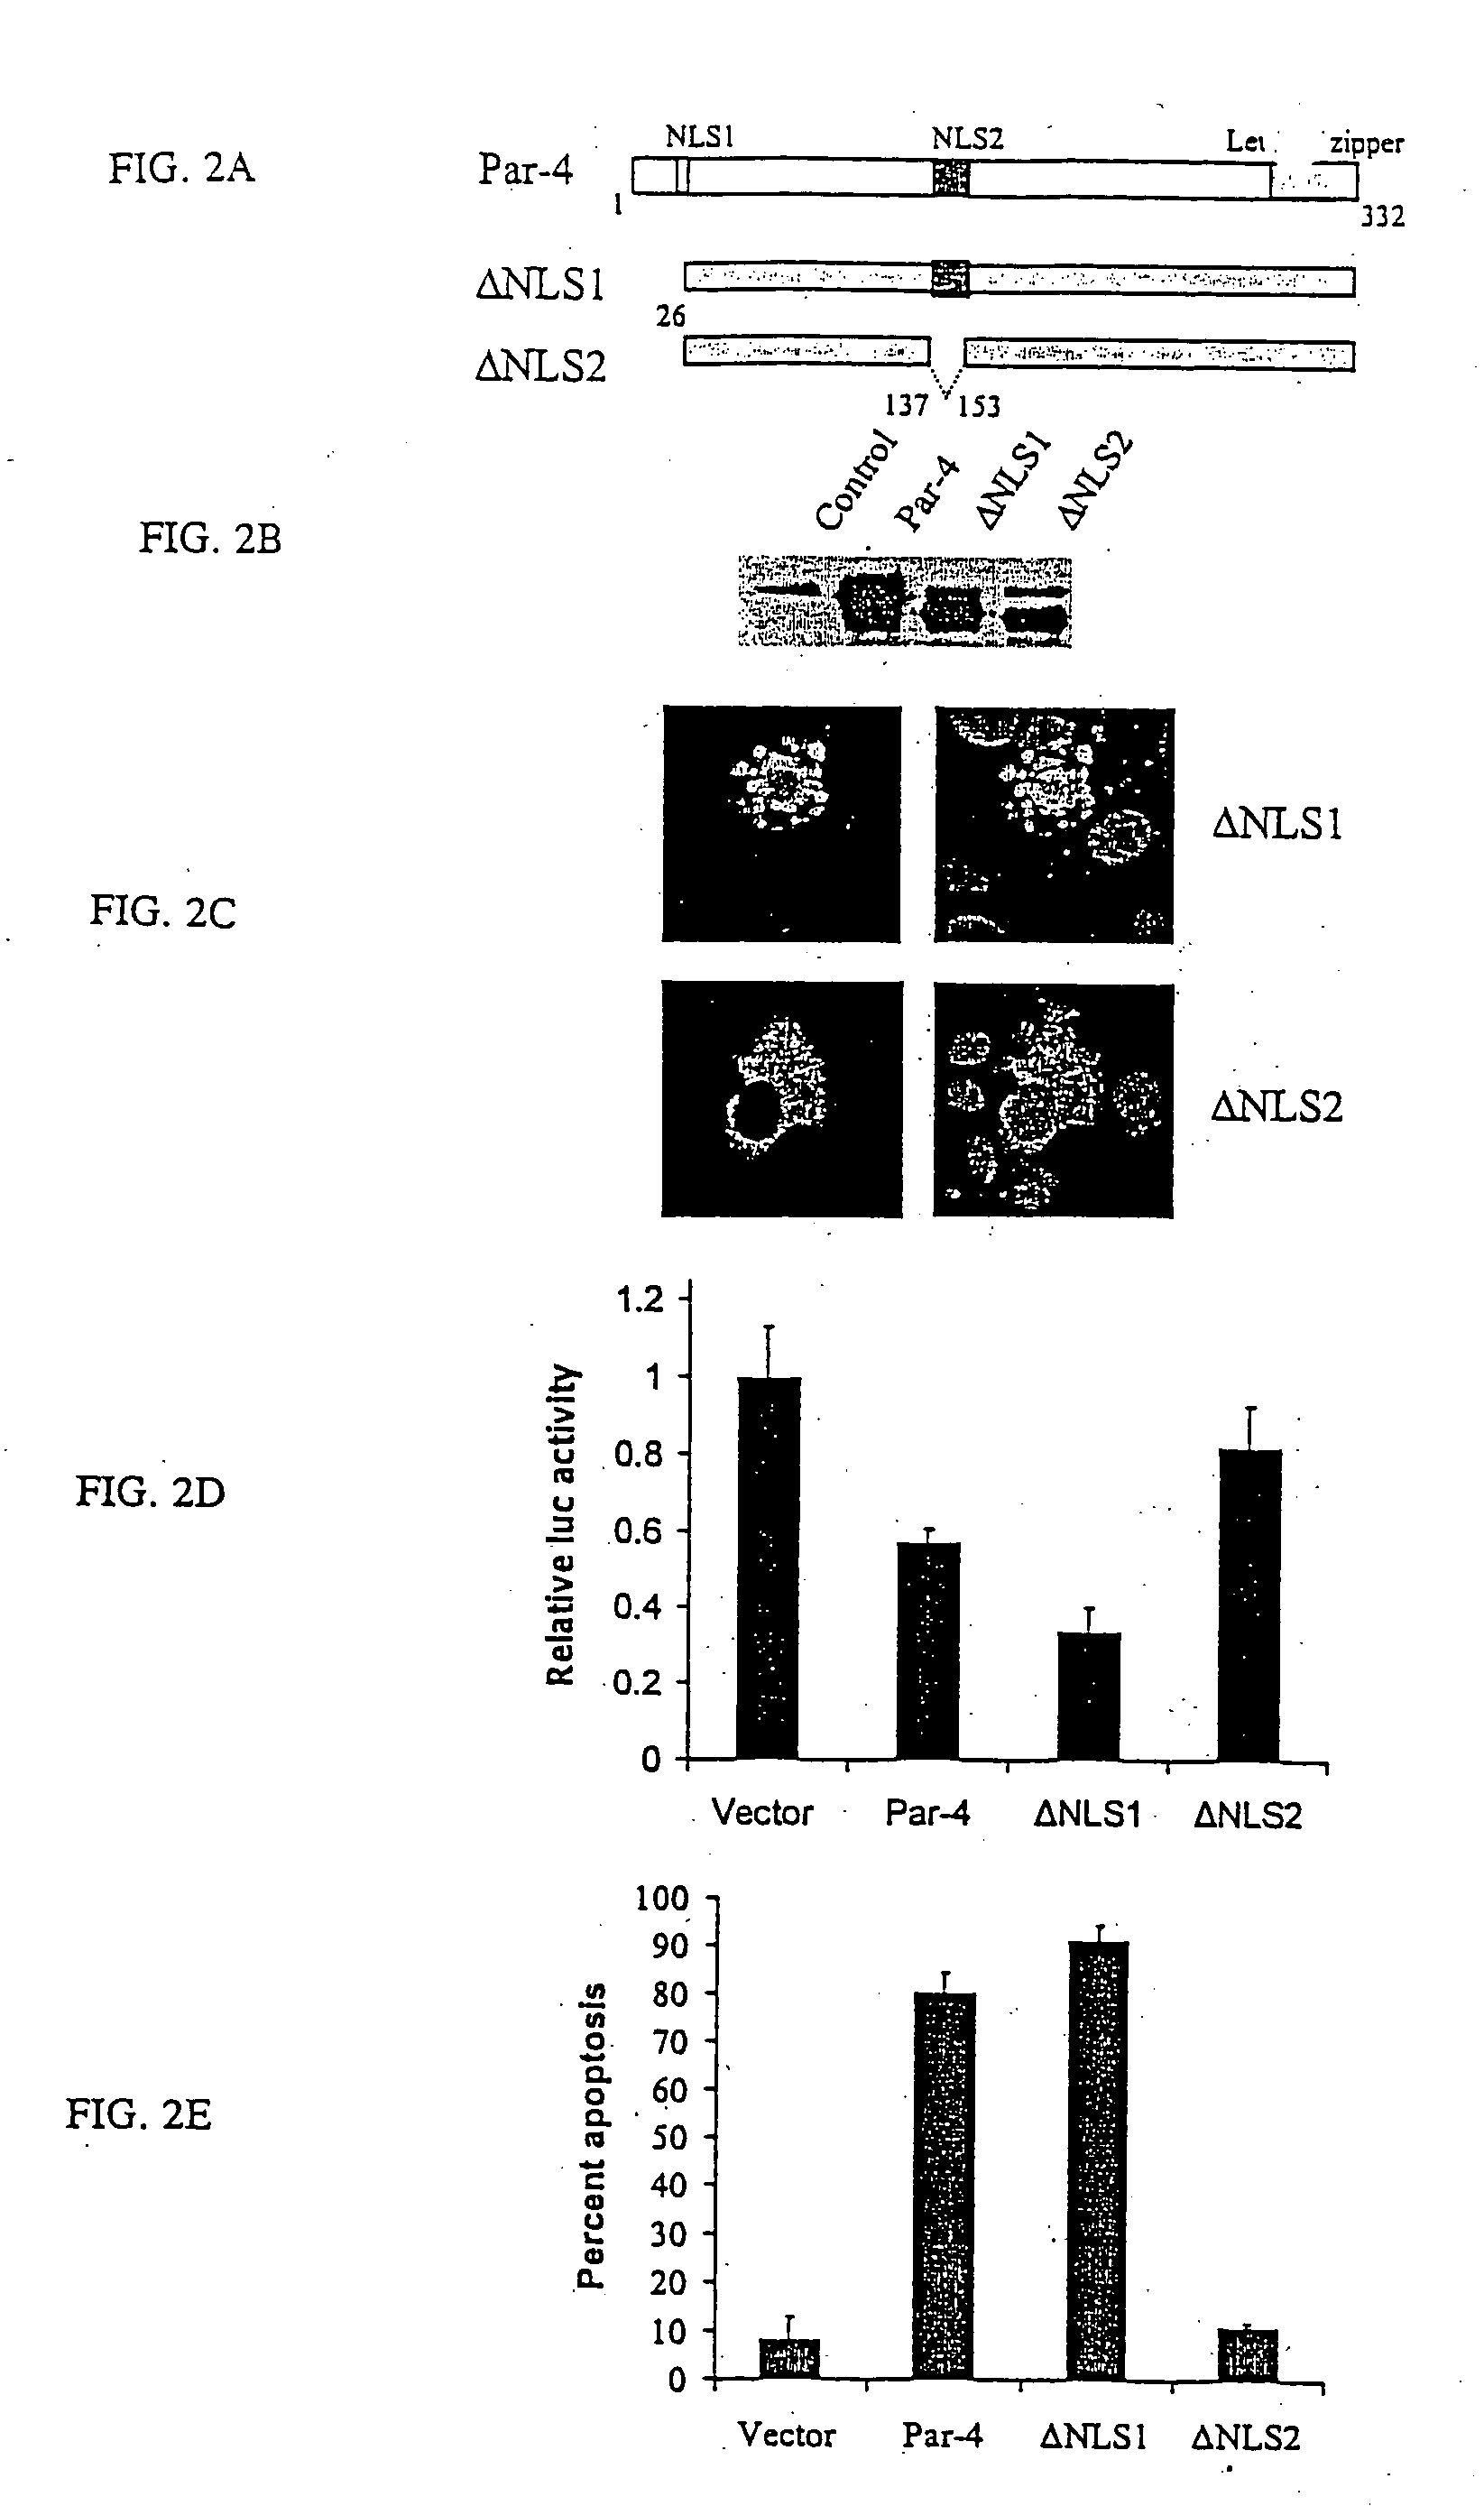 Identification of a unique core domain of Par-4 sufficient for selective apoptosis induction in cancer cells